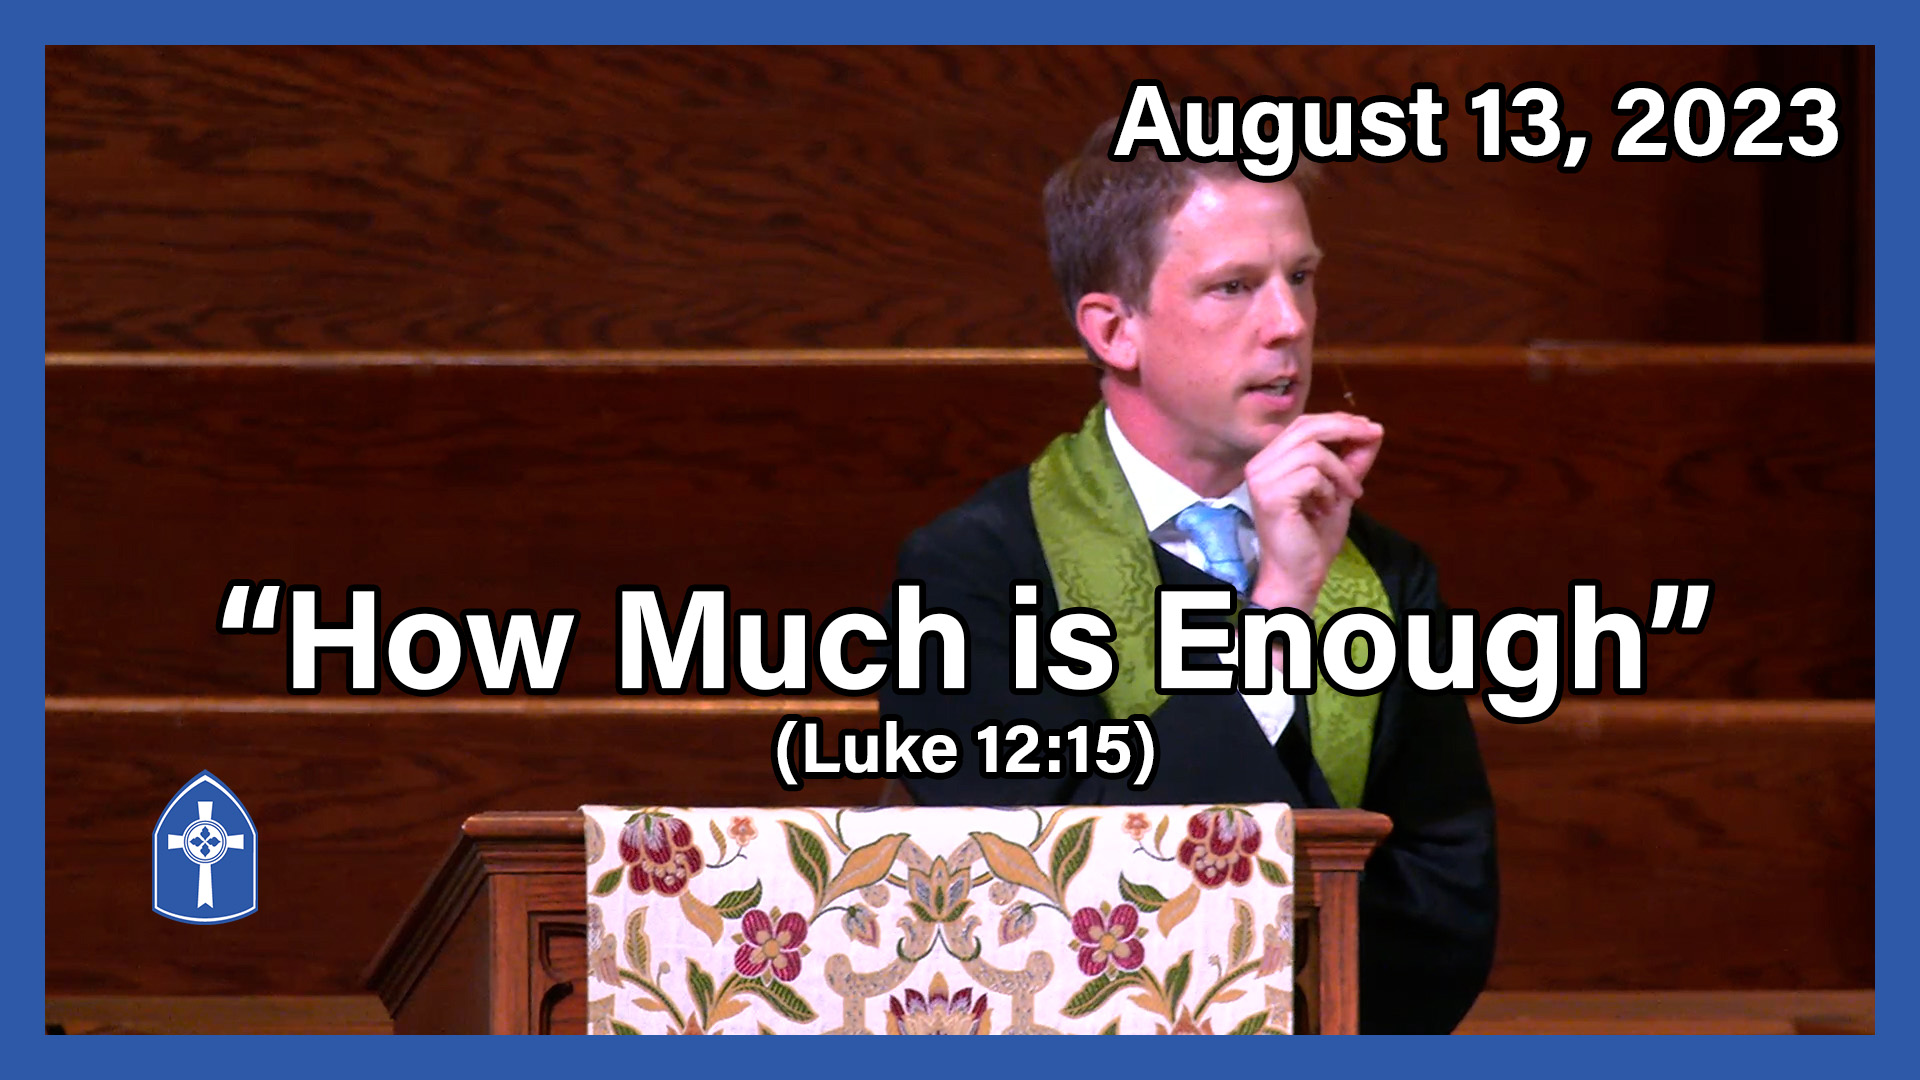 August 13 - How Much is Enough?